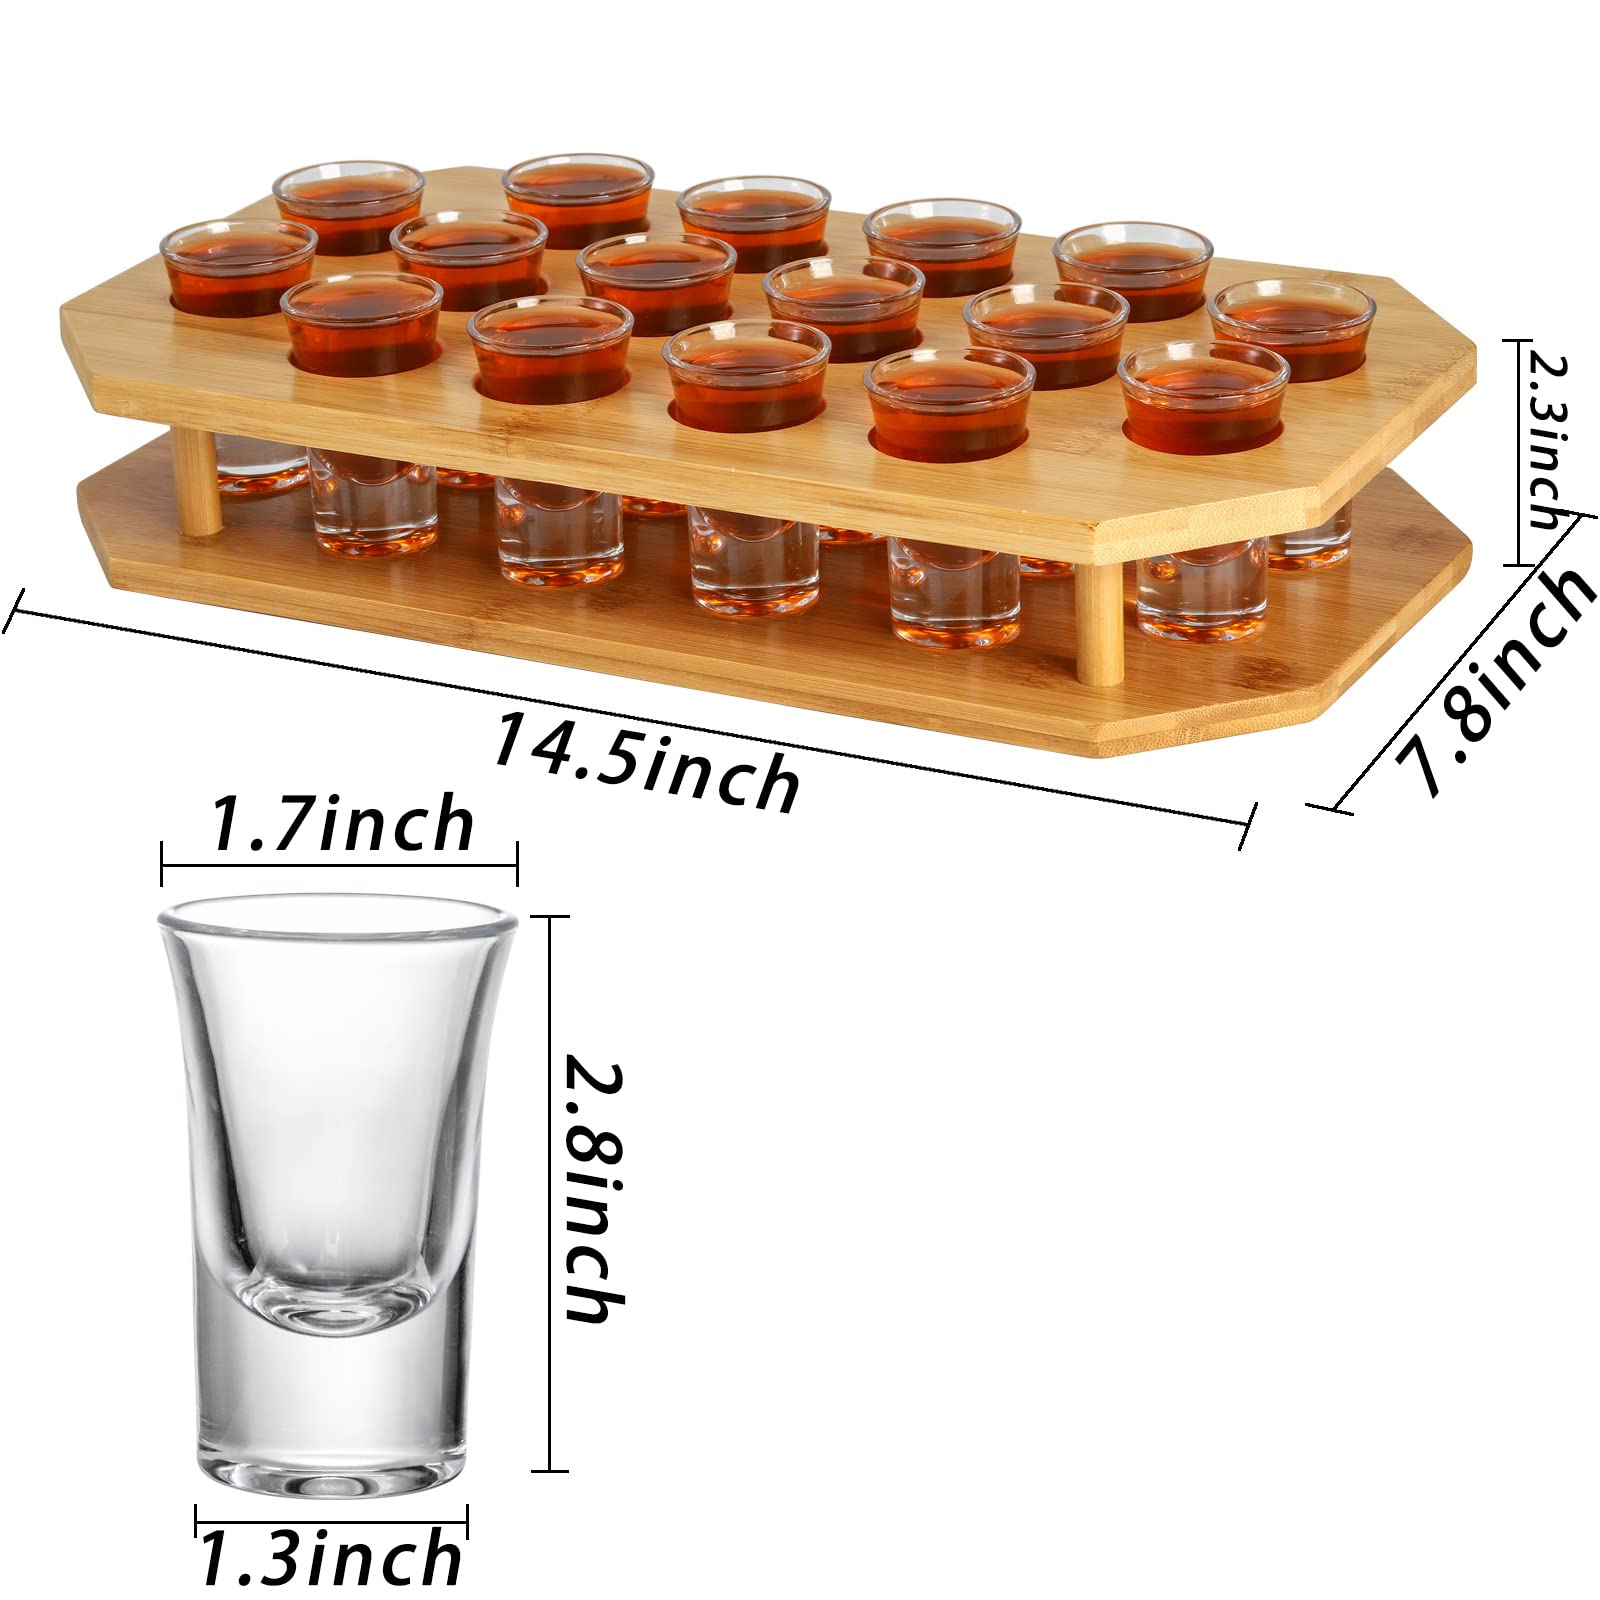 SOUJOY 16 Shot Glass Server Tray, 1 oz Shot Glass Set with Bamboo Tray, Party Serving Holder for Bar, Pub, Party, Club Drinking